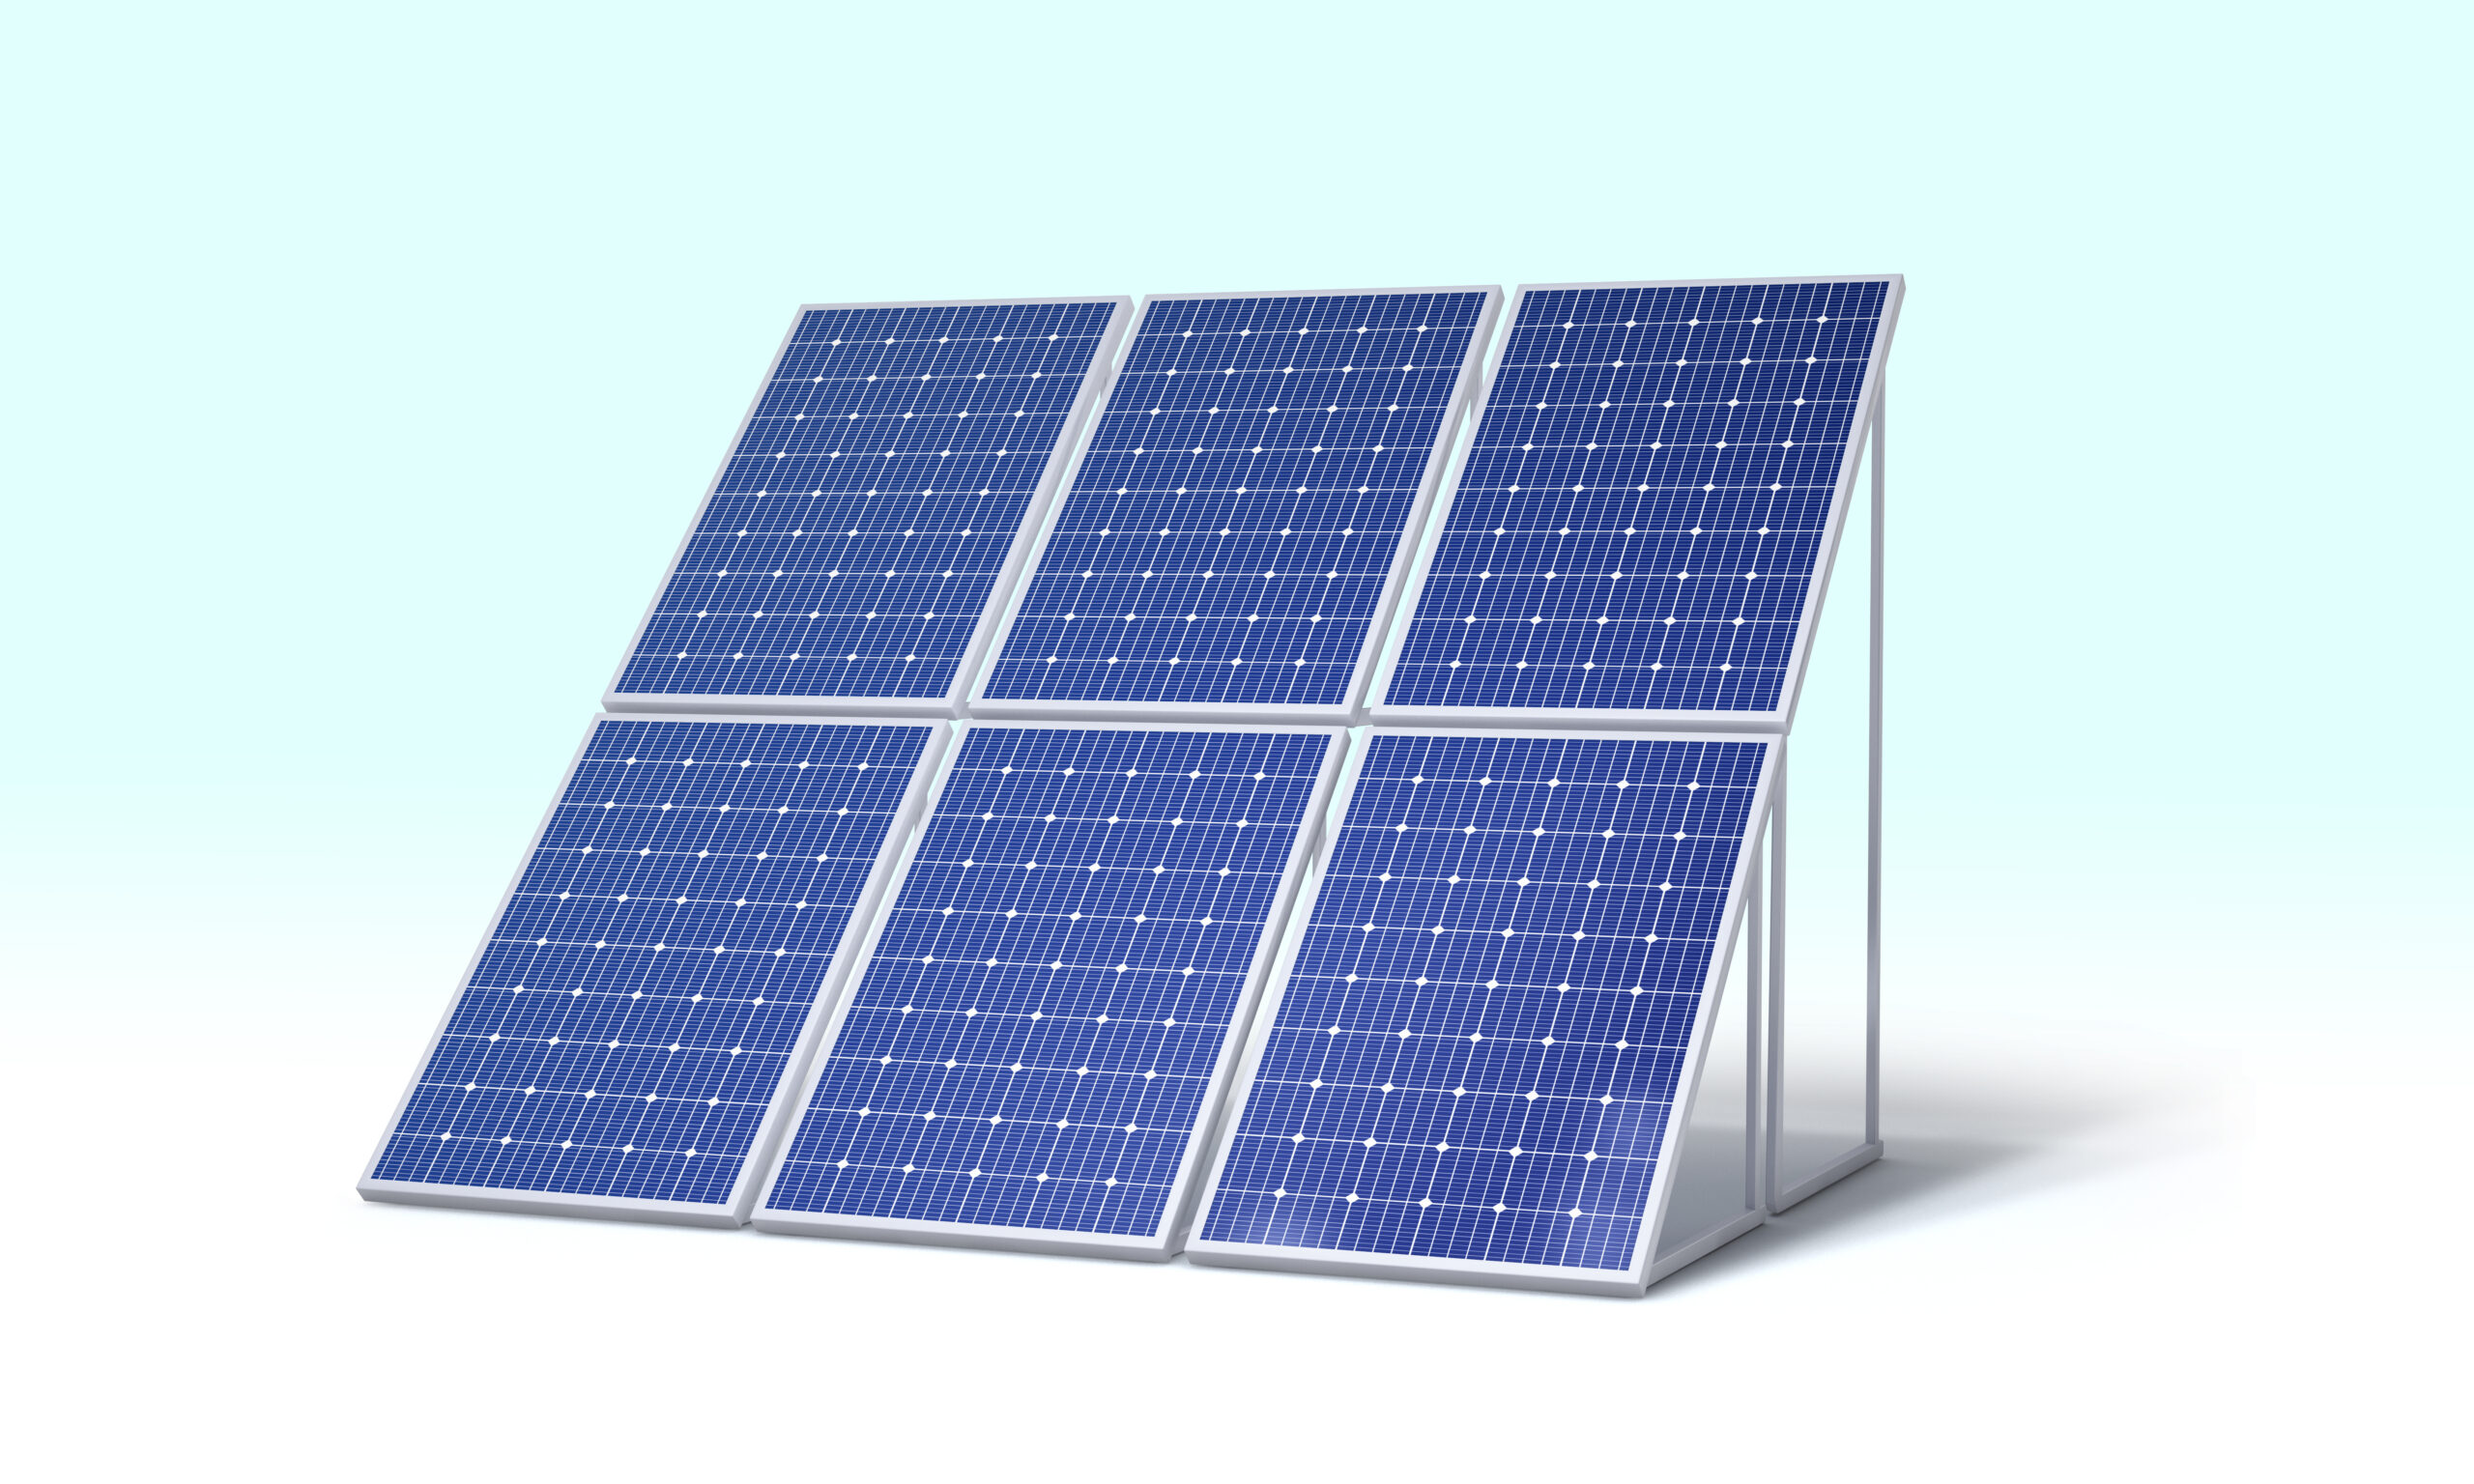 The thing you know about solar batteries is that they provide a sustainable source of power.